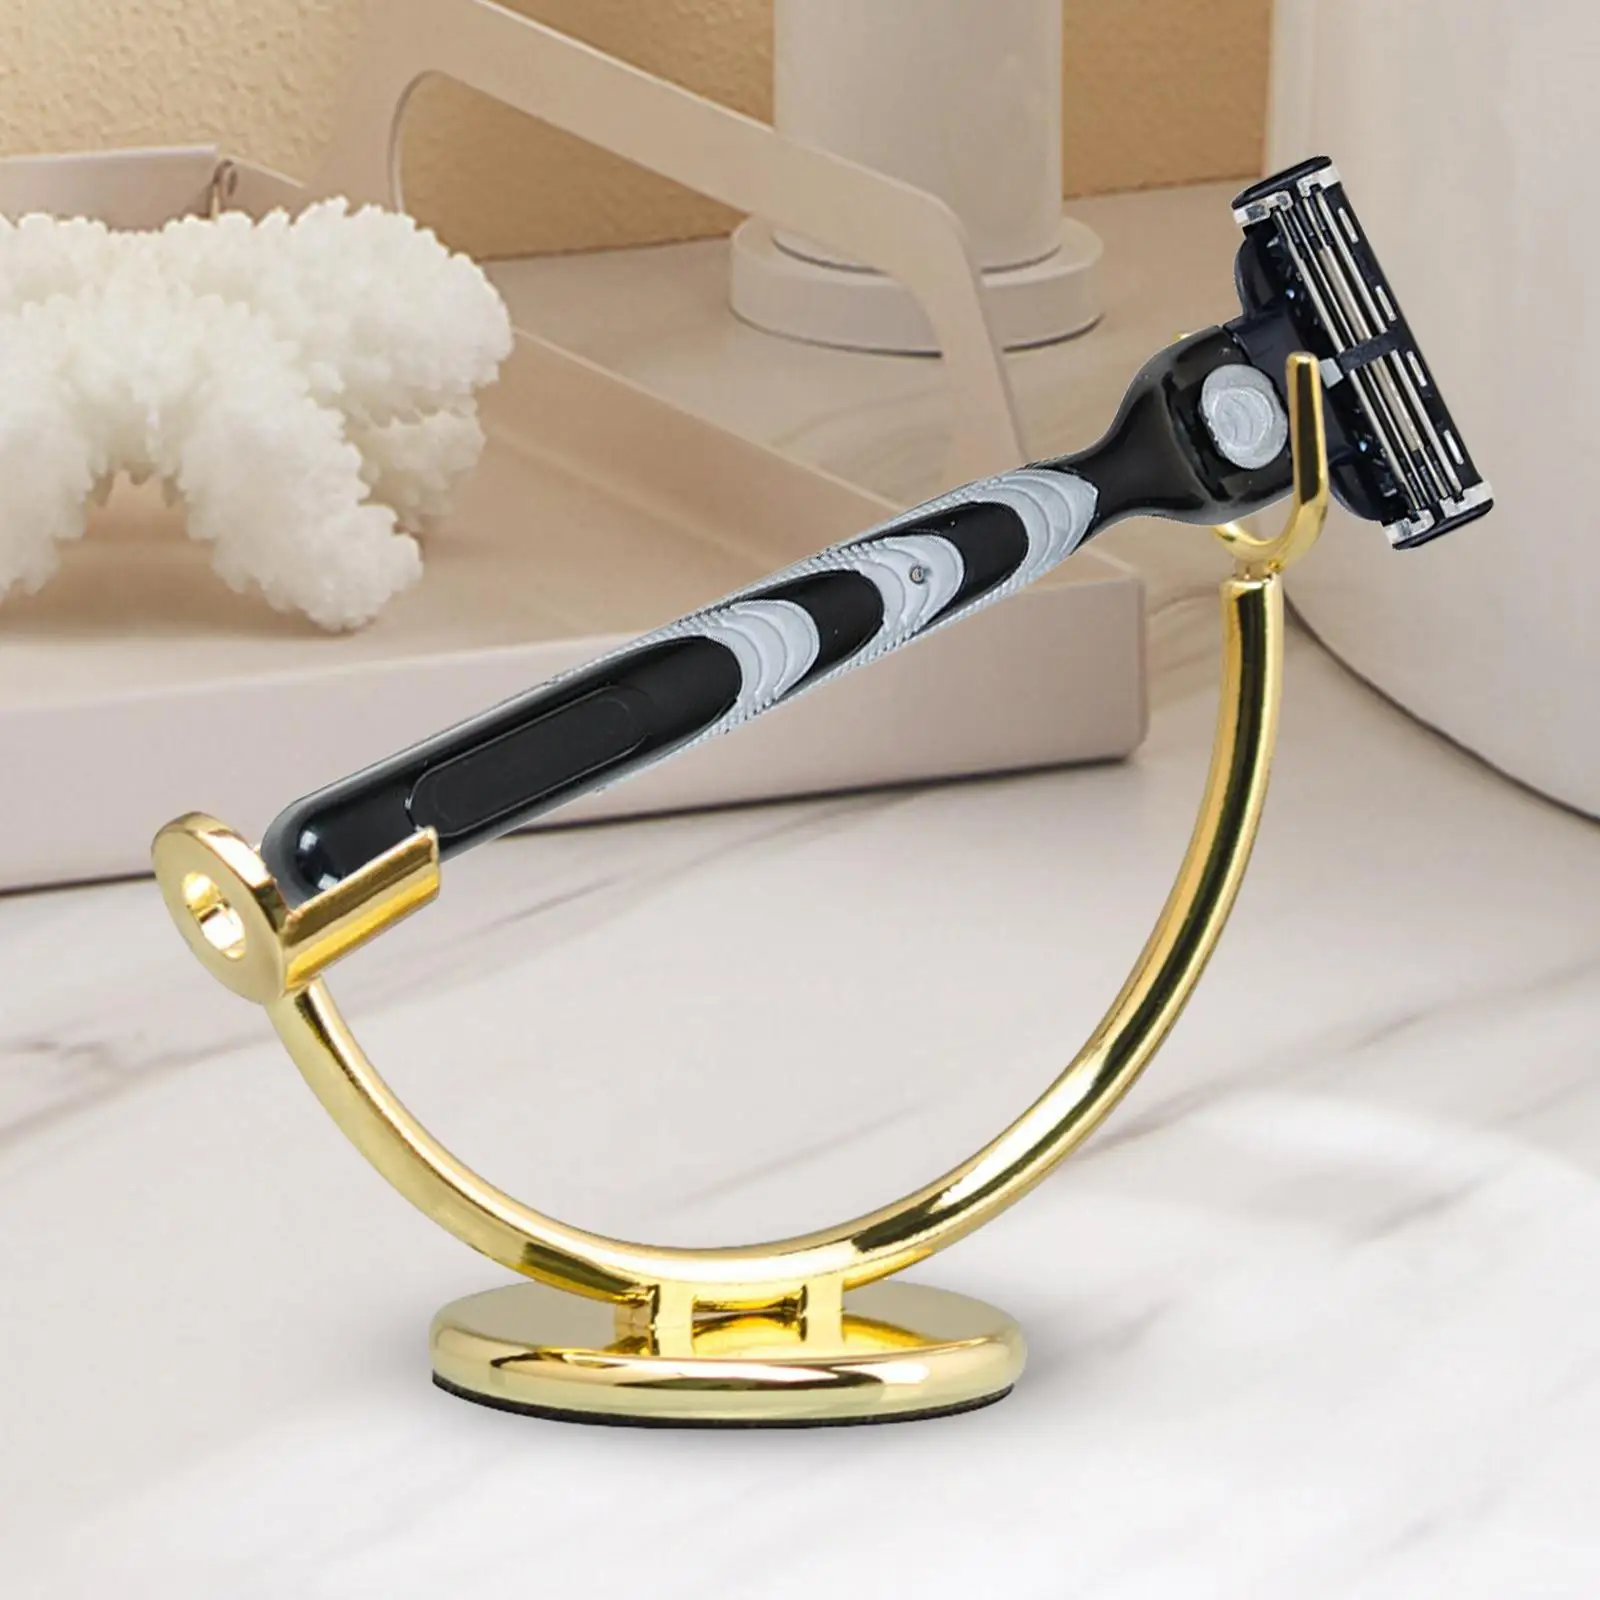 Shaver Bracket Accessory Shaver Holder Stand for Present Hair Salon Home Use